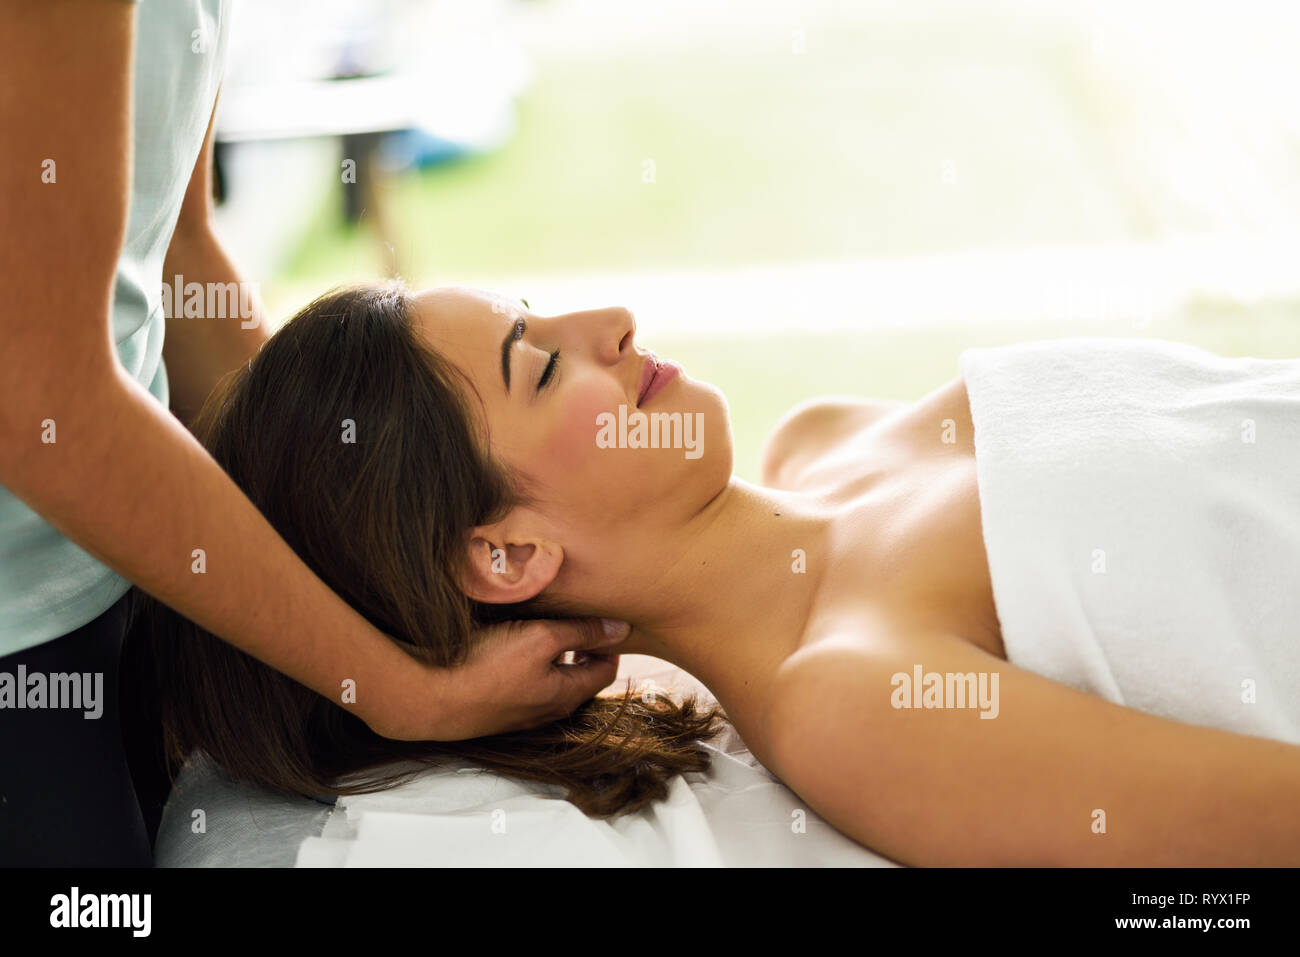 Young smiling woman receiving a head massage in a spa center. Stock Photo